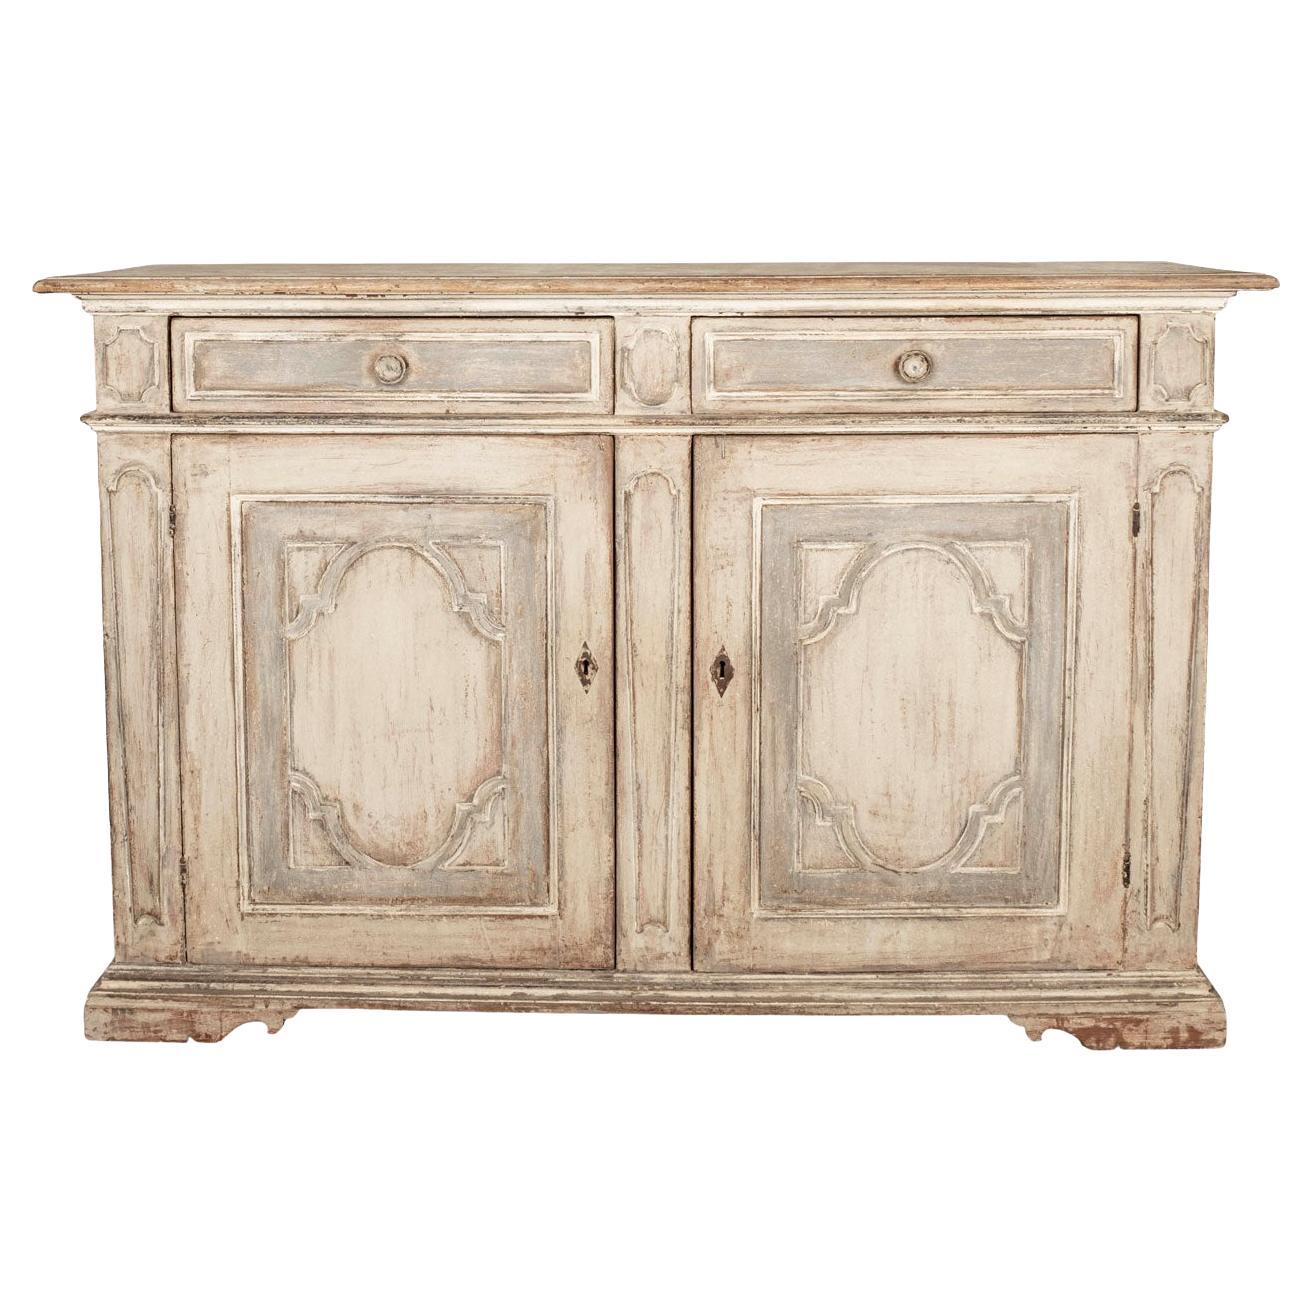 18th Century Tuscan Painted Credenza From Italy For Sale